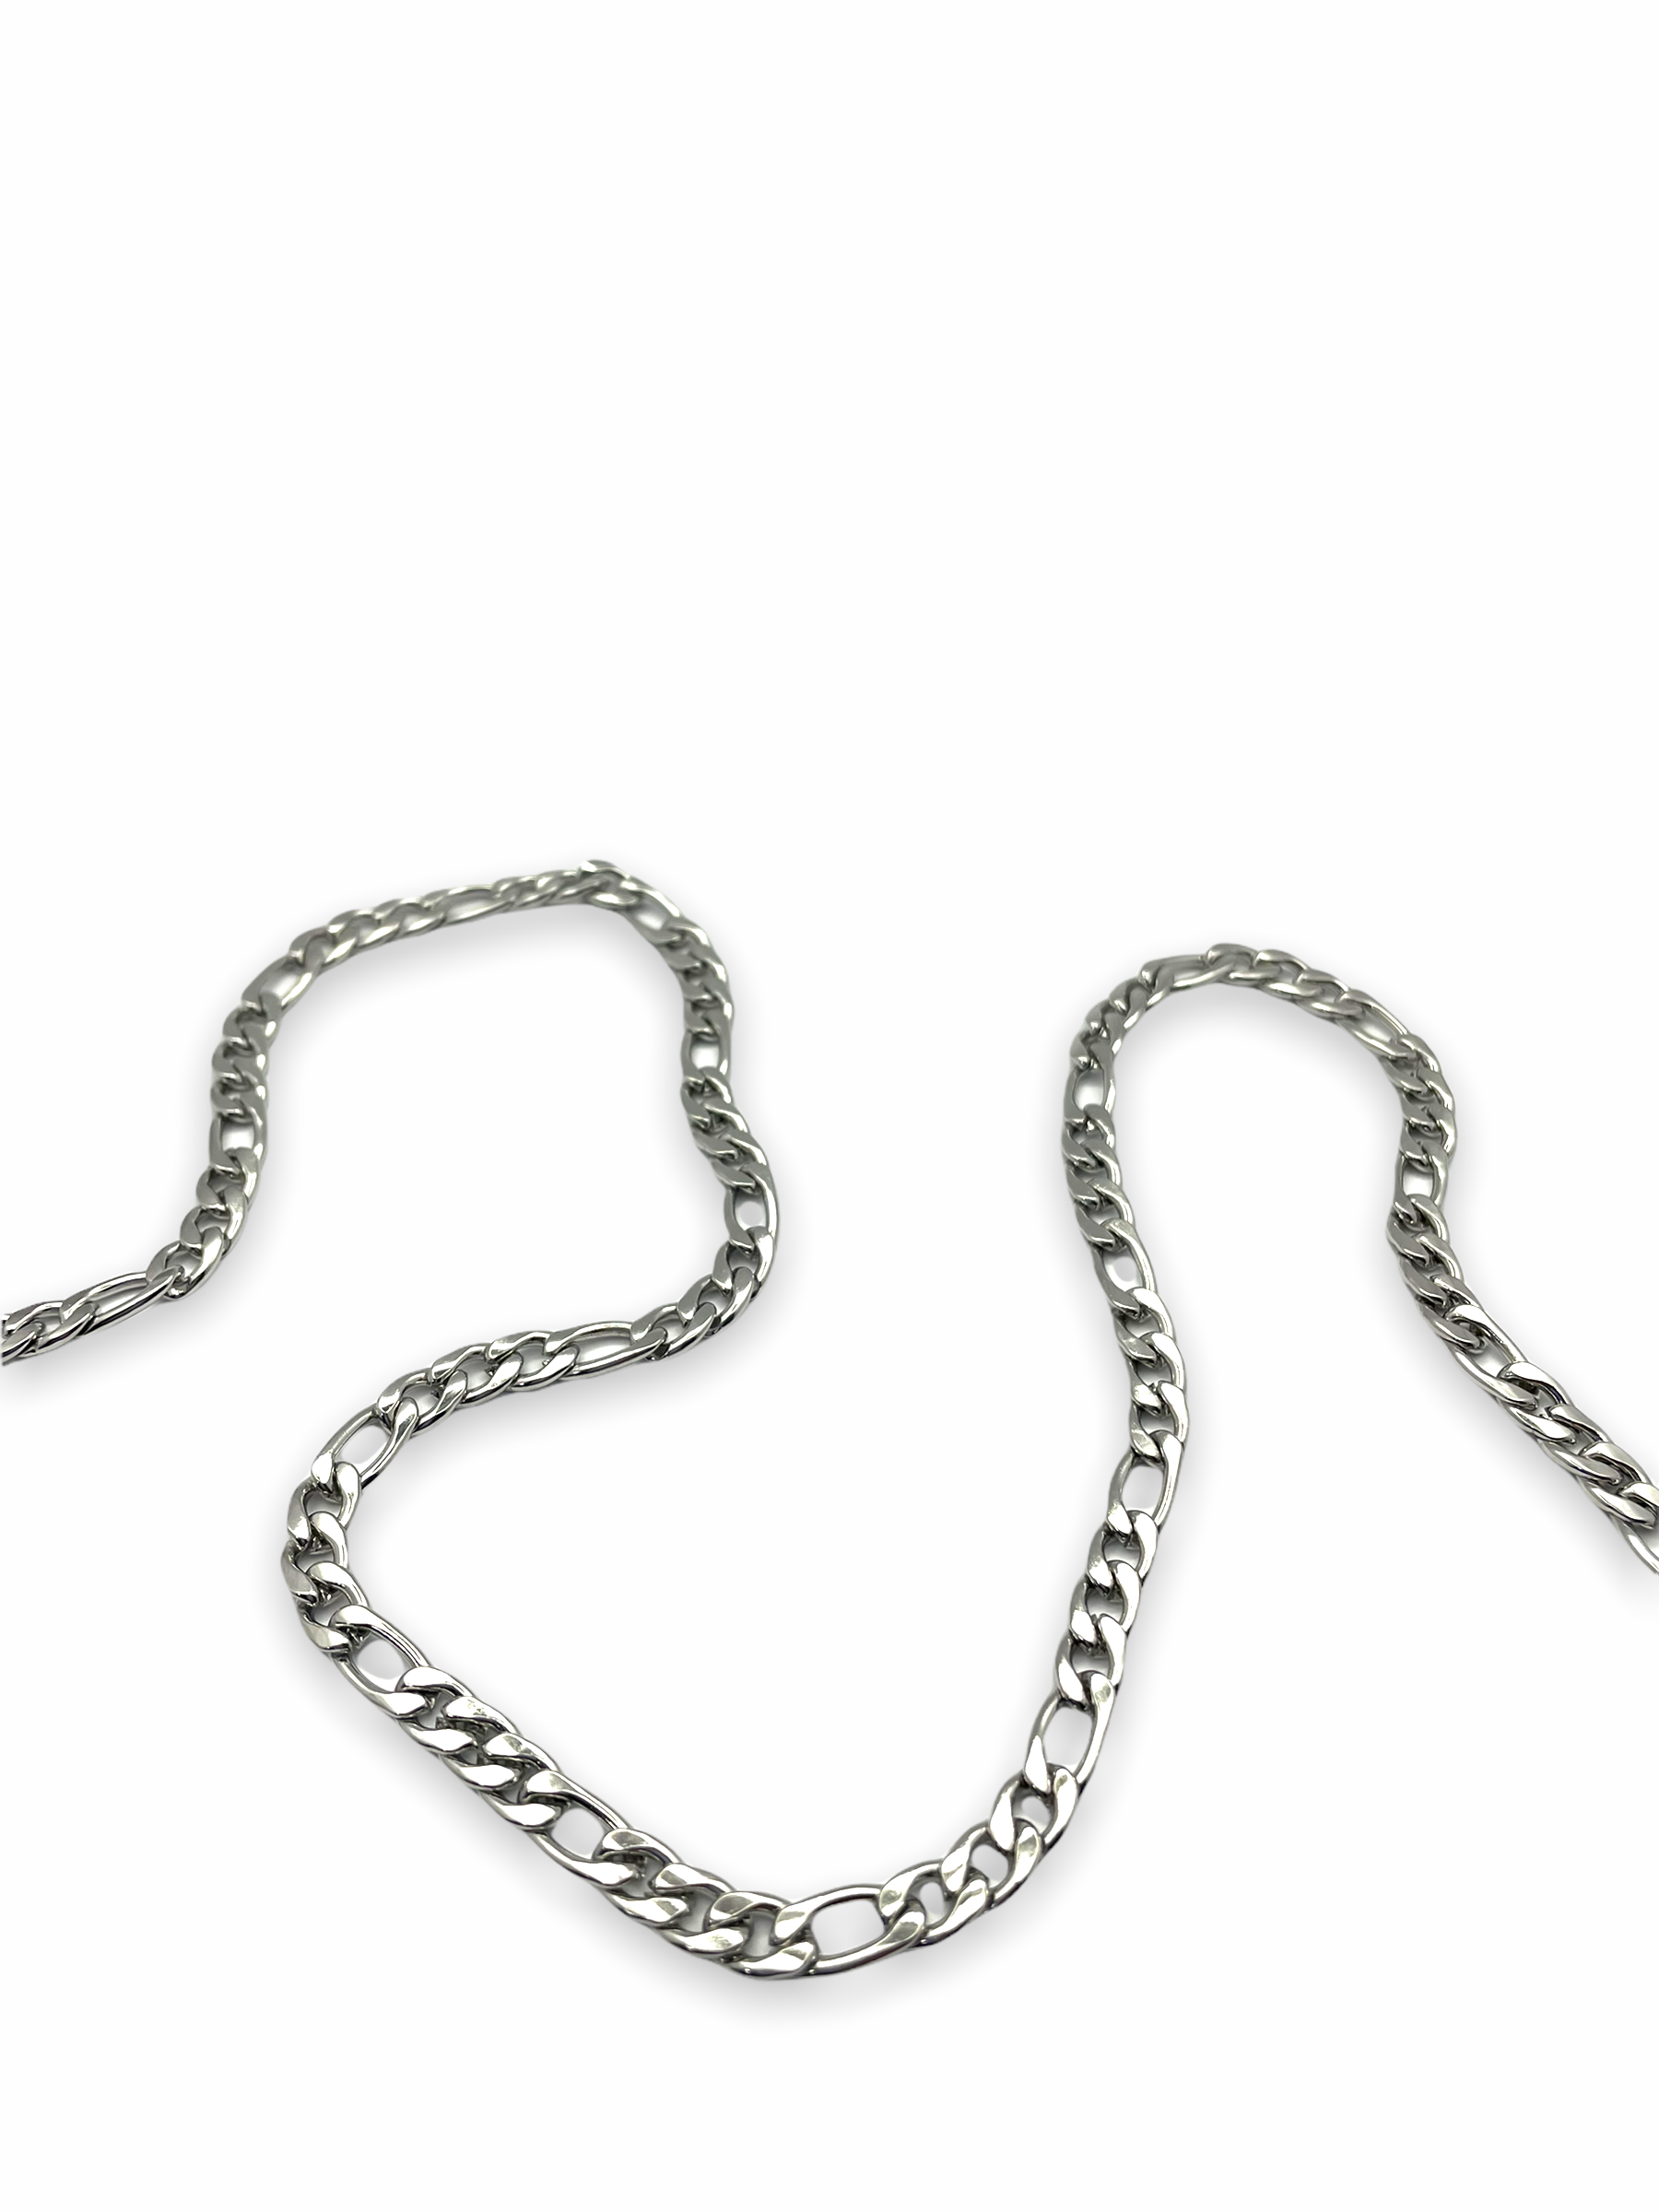 Mens Necklace in Stainless Steel